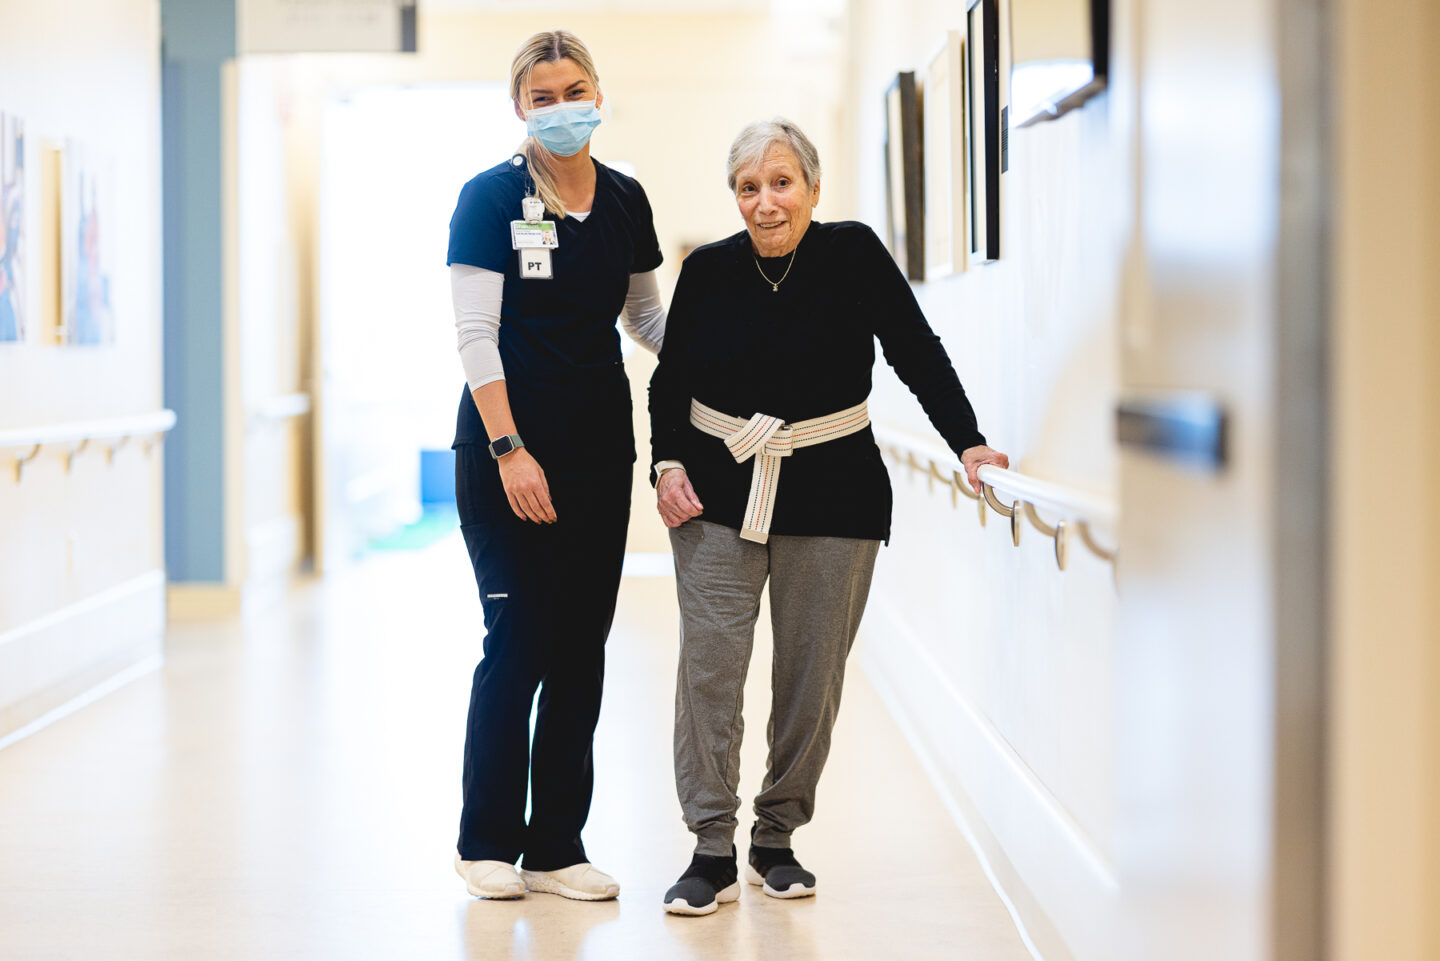 physical therapist working with a patient and smiling in the hall of a rehabilitation hospital